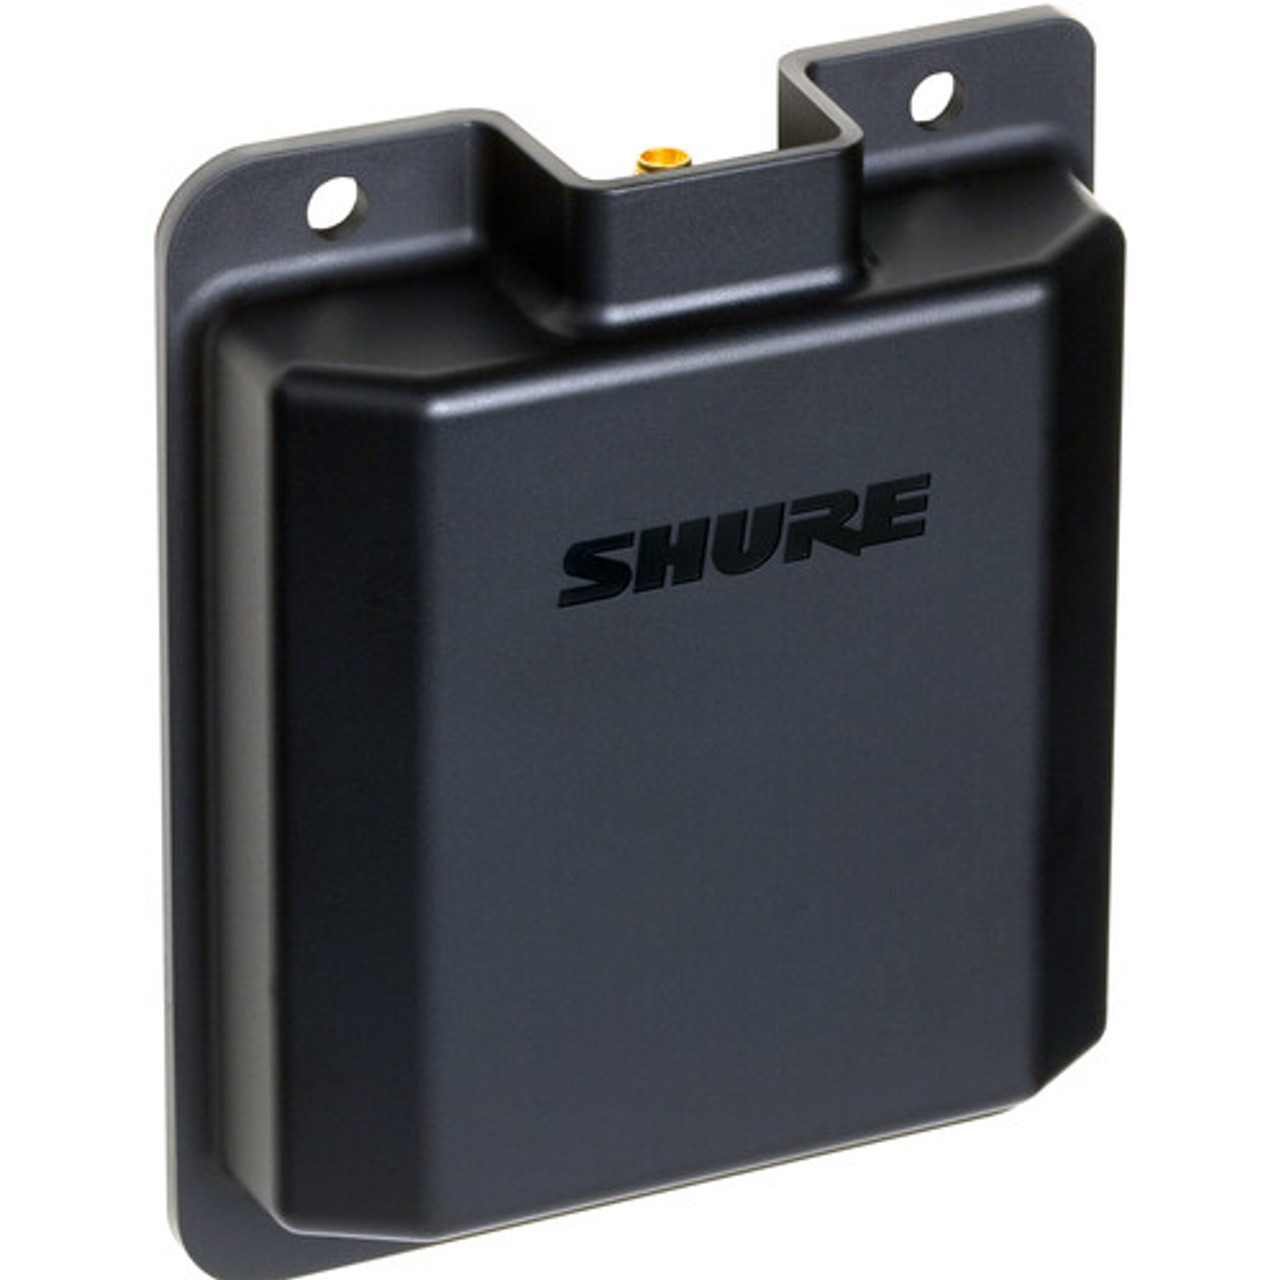 Shure AXT644 Directional Antenna for AD610 ShowLink (2.4 GHz) (AXT644)